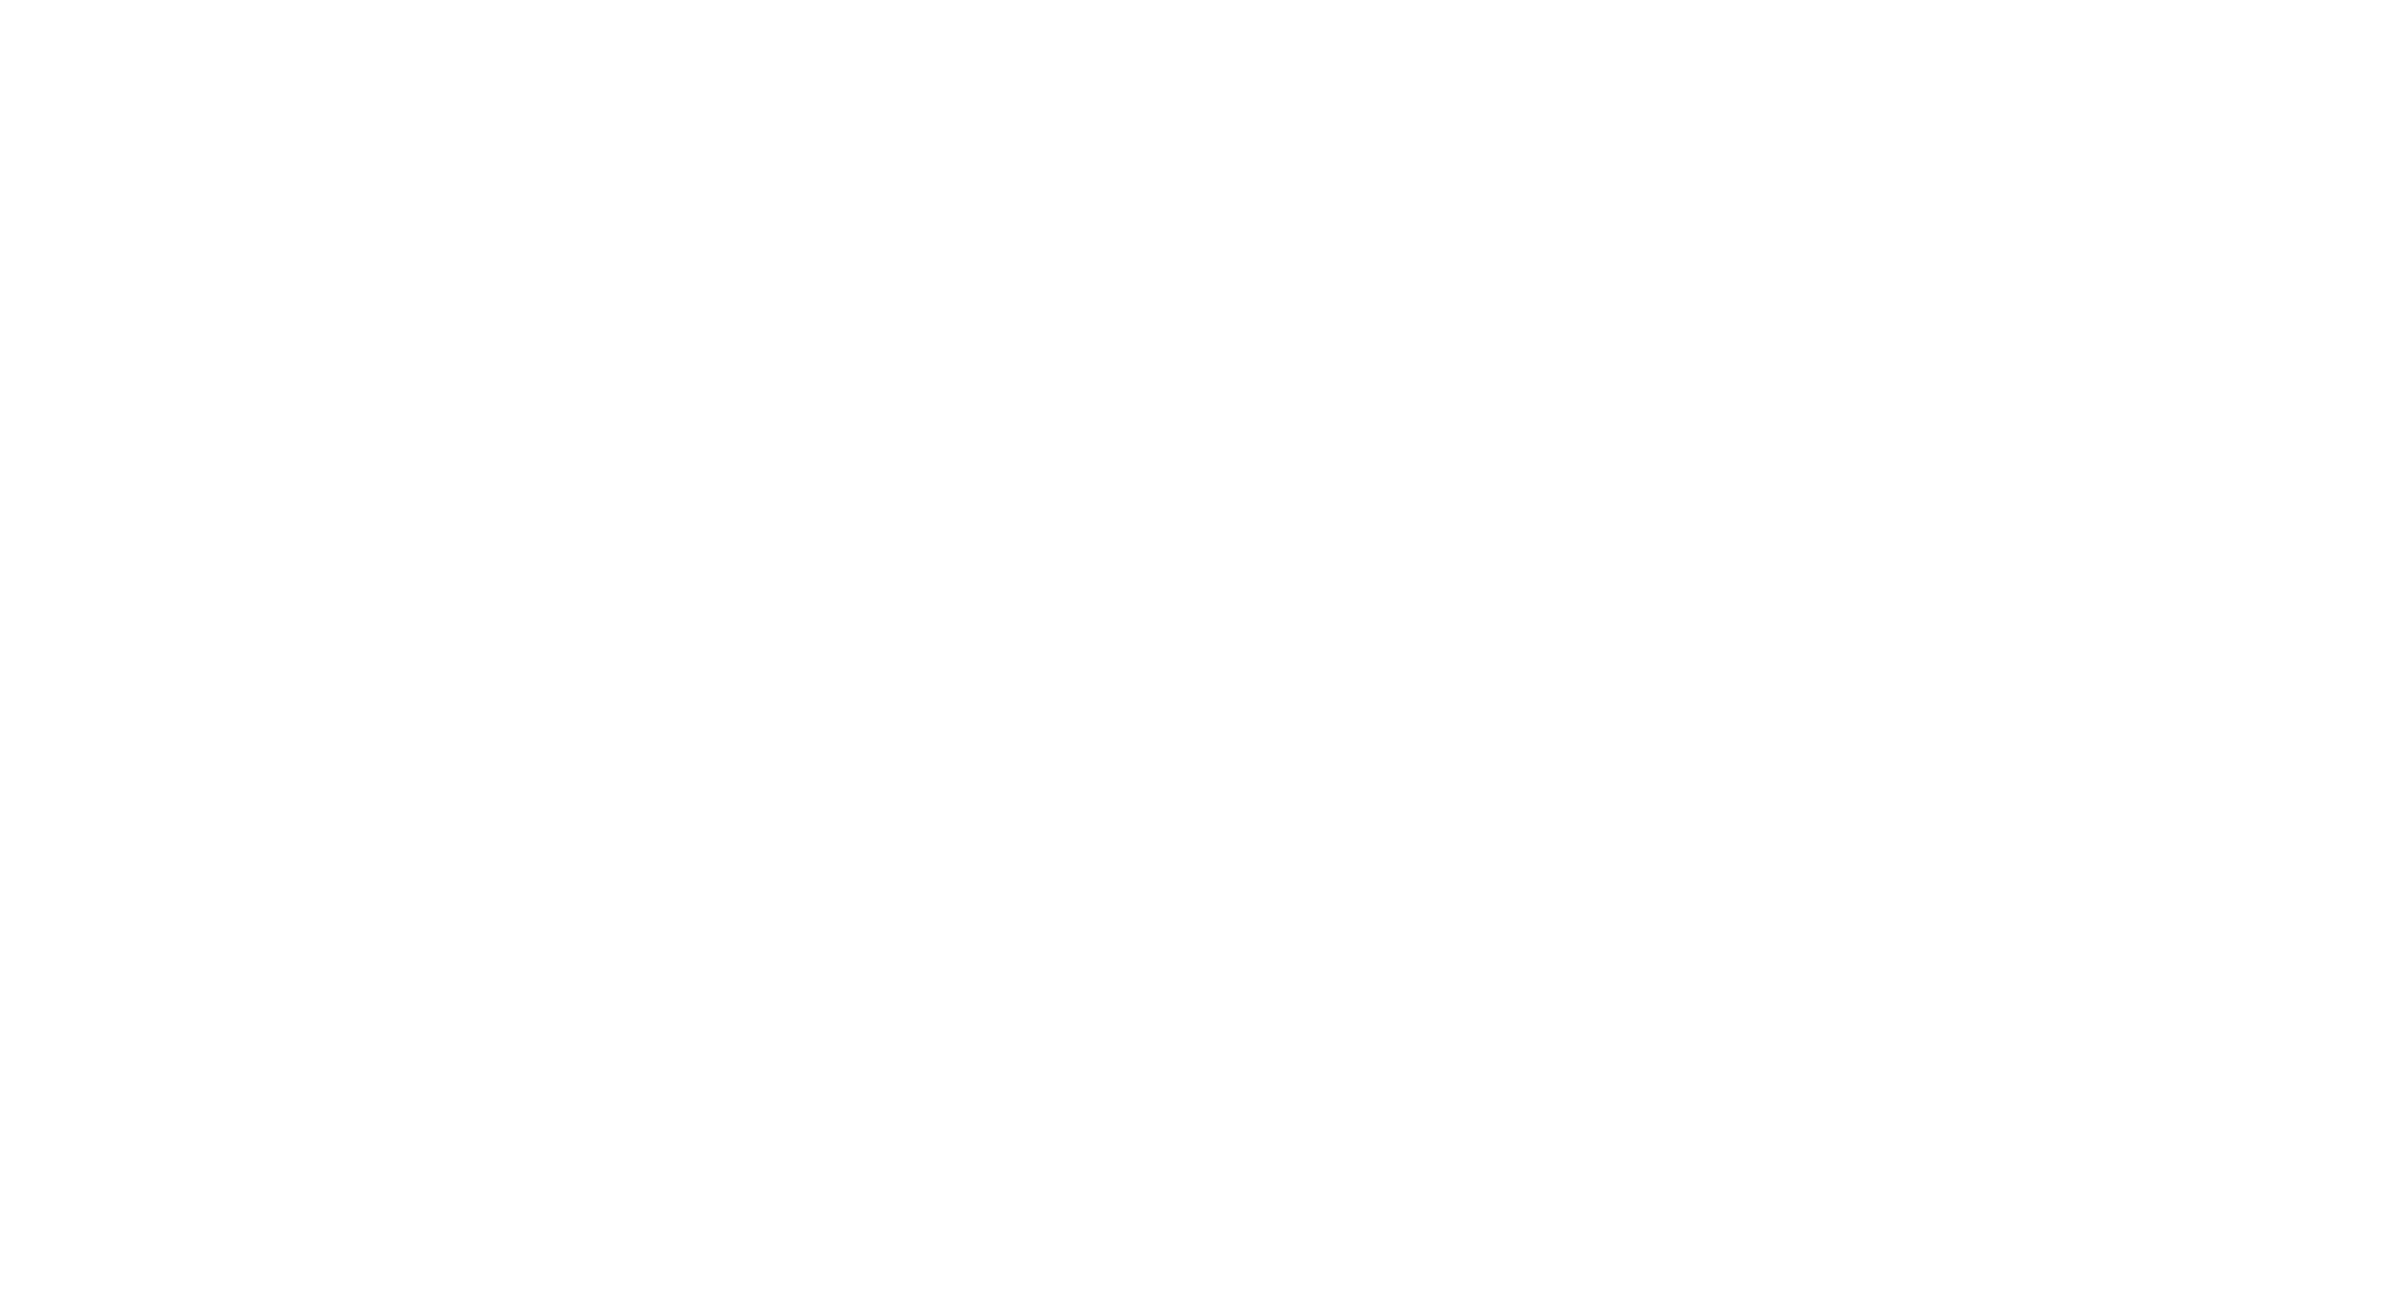 In Travel Solutions - Forbes Germany